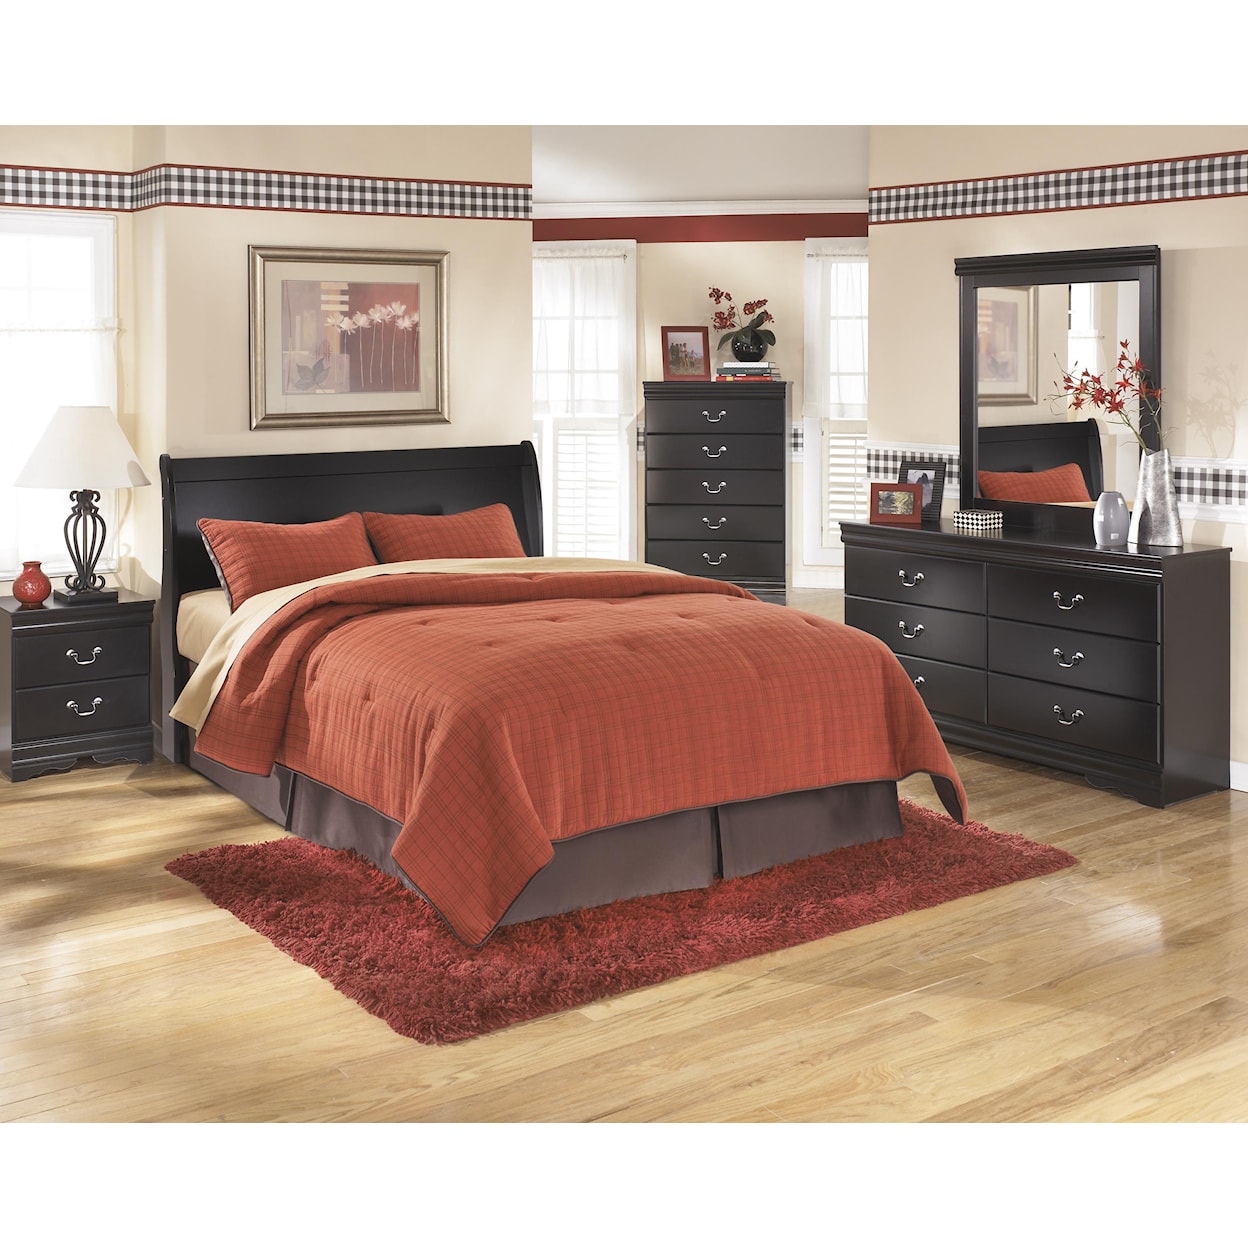 Signature Design by Ashley Huey Vineyard 7PC Queen Bedroom Group